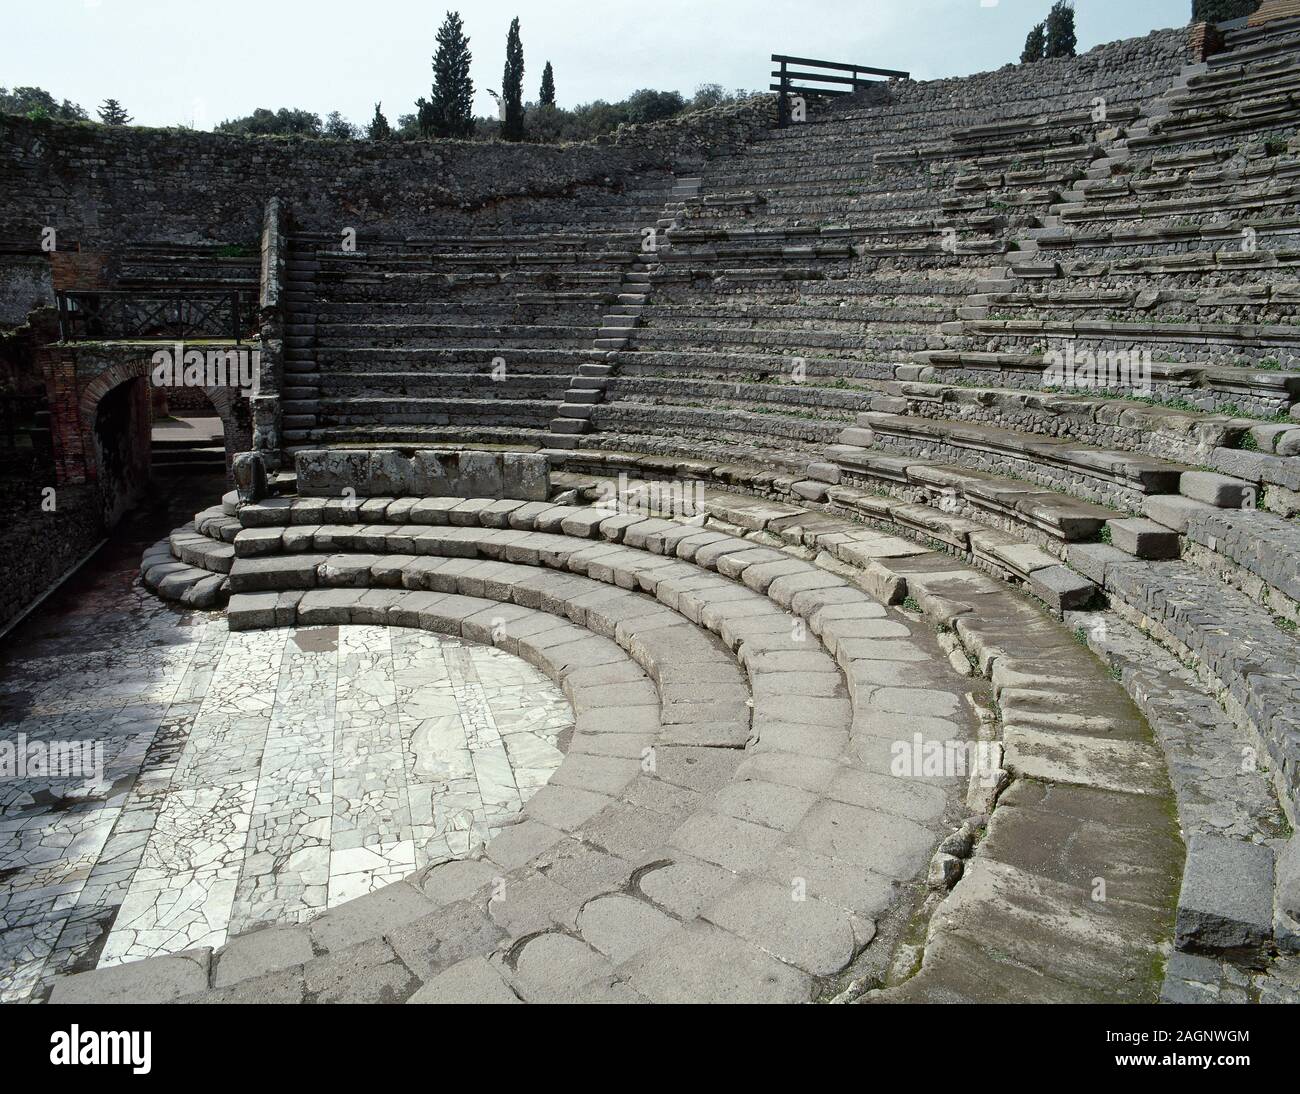 Italy. Pompeii. Ancient Roman city destroyed by the eruption of the Vesuvius in 79 AD. Small Theatre or Odeon, built in 80 BC. Cavea. View of the orchestra and caveas. Campania. Stock Photo